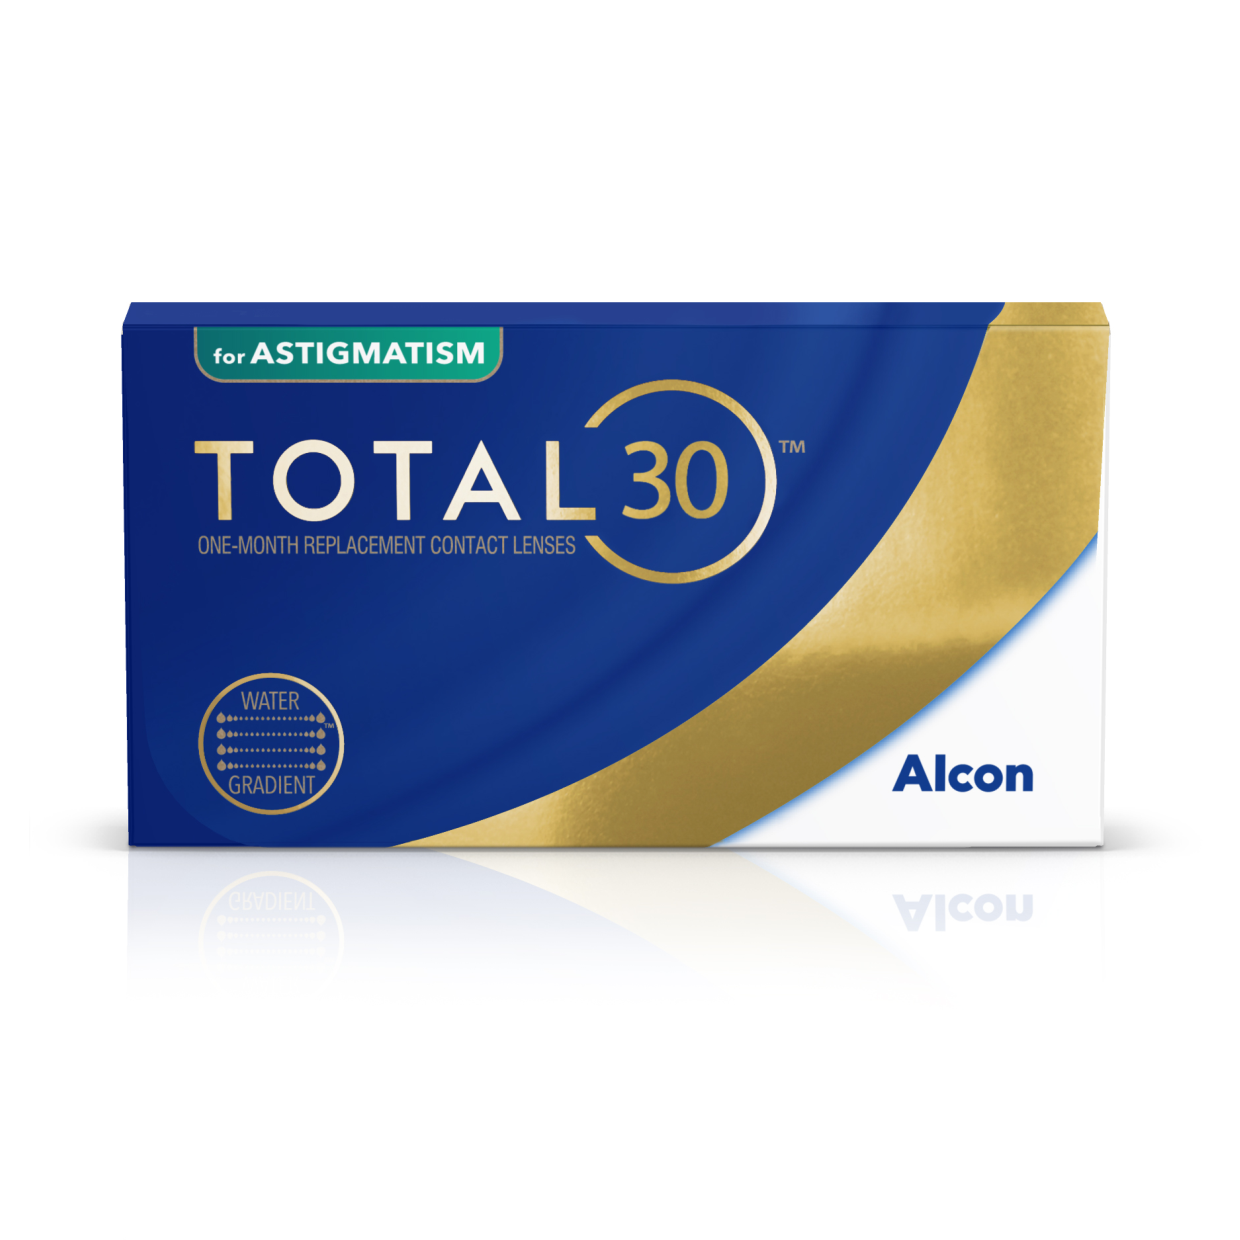 TOTAL30 for Astigmatism, Alcon